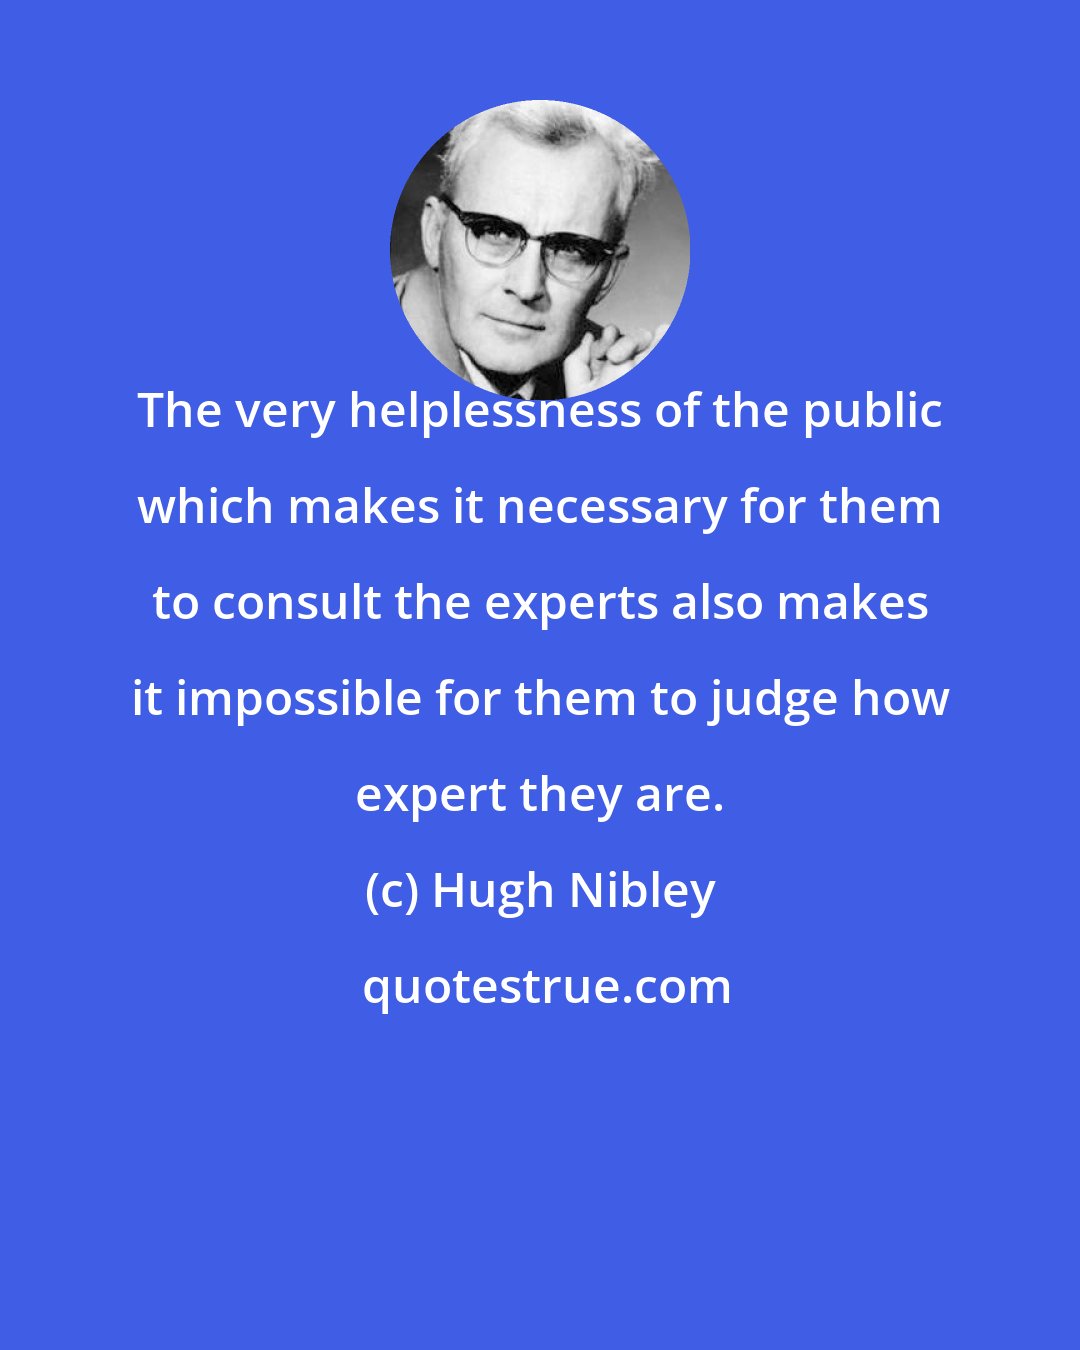 Hugh Nibley: The very helplessness of the public which makes it necessary for them to consult the experts also makes it impossible for them to judge how expert they are.